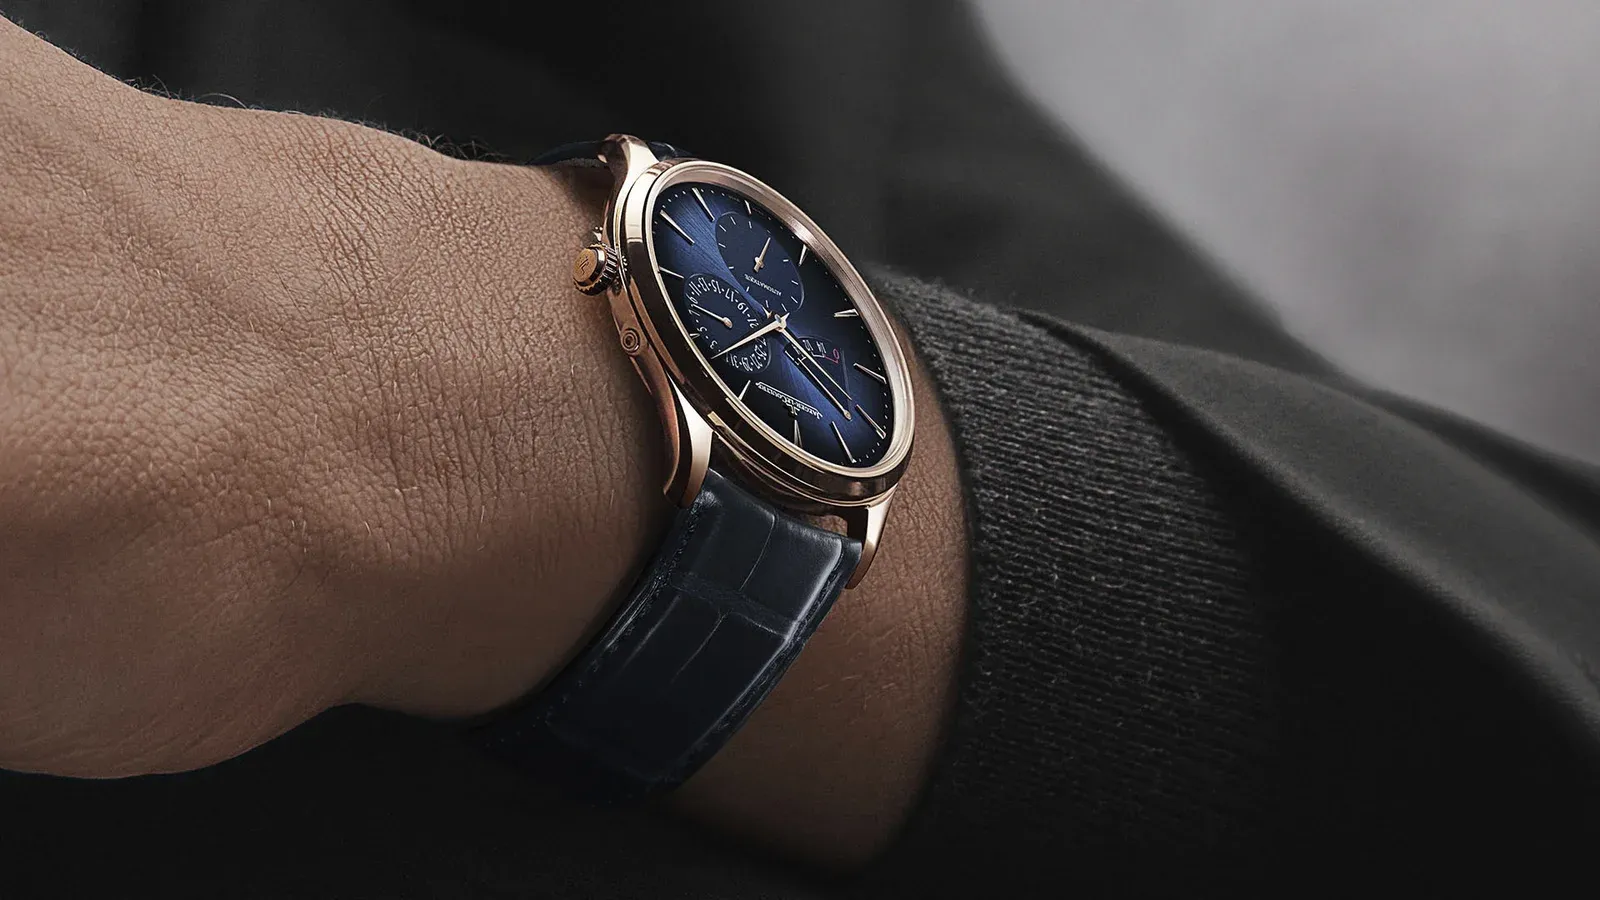 Jaeger-LeCoultre New Master Ultra-Thin Power Reserve on wrist